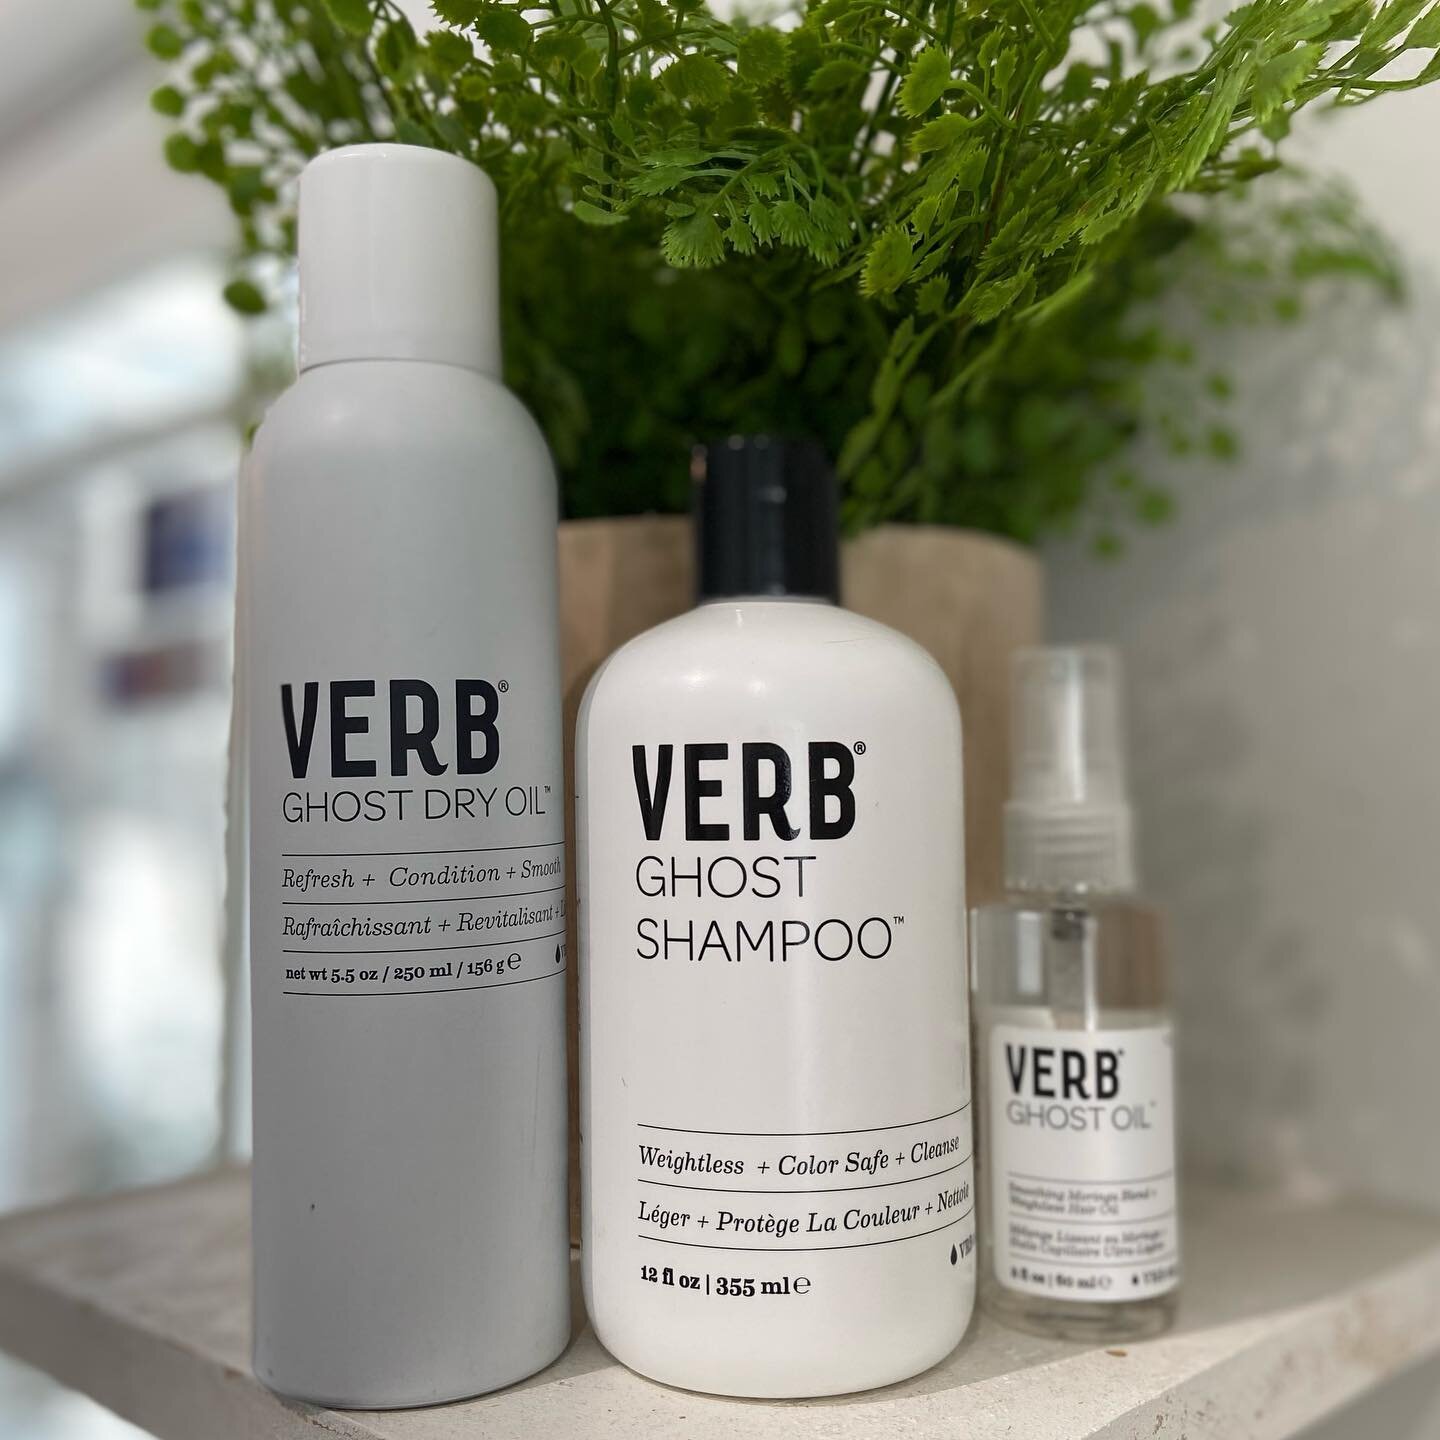 Loving our new products by Verb😍 @verbproducts